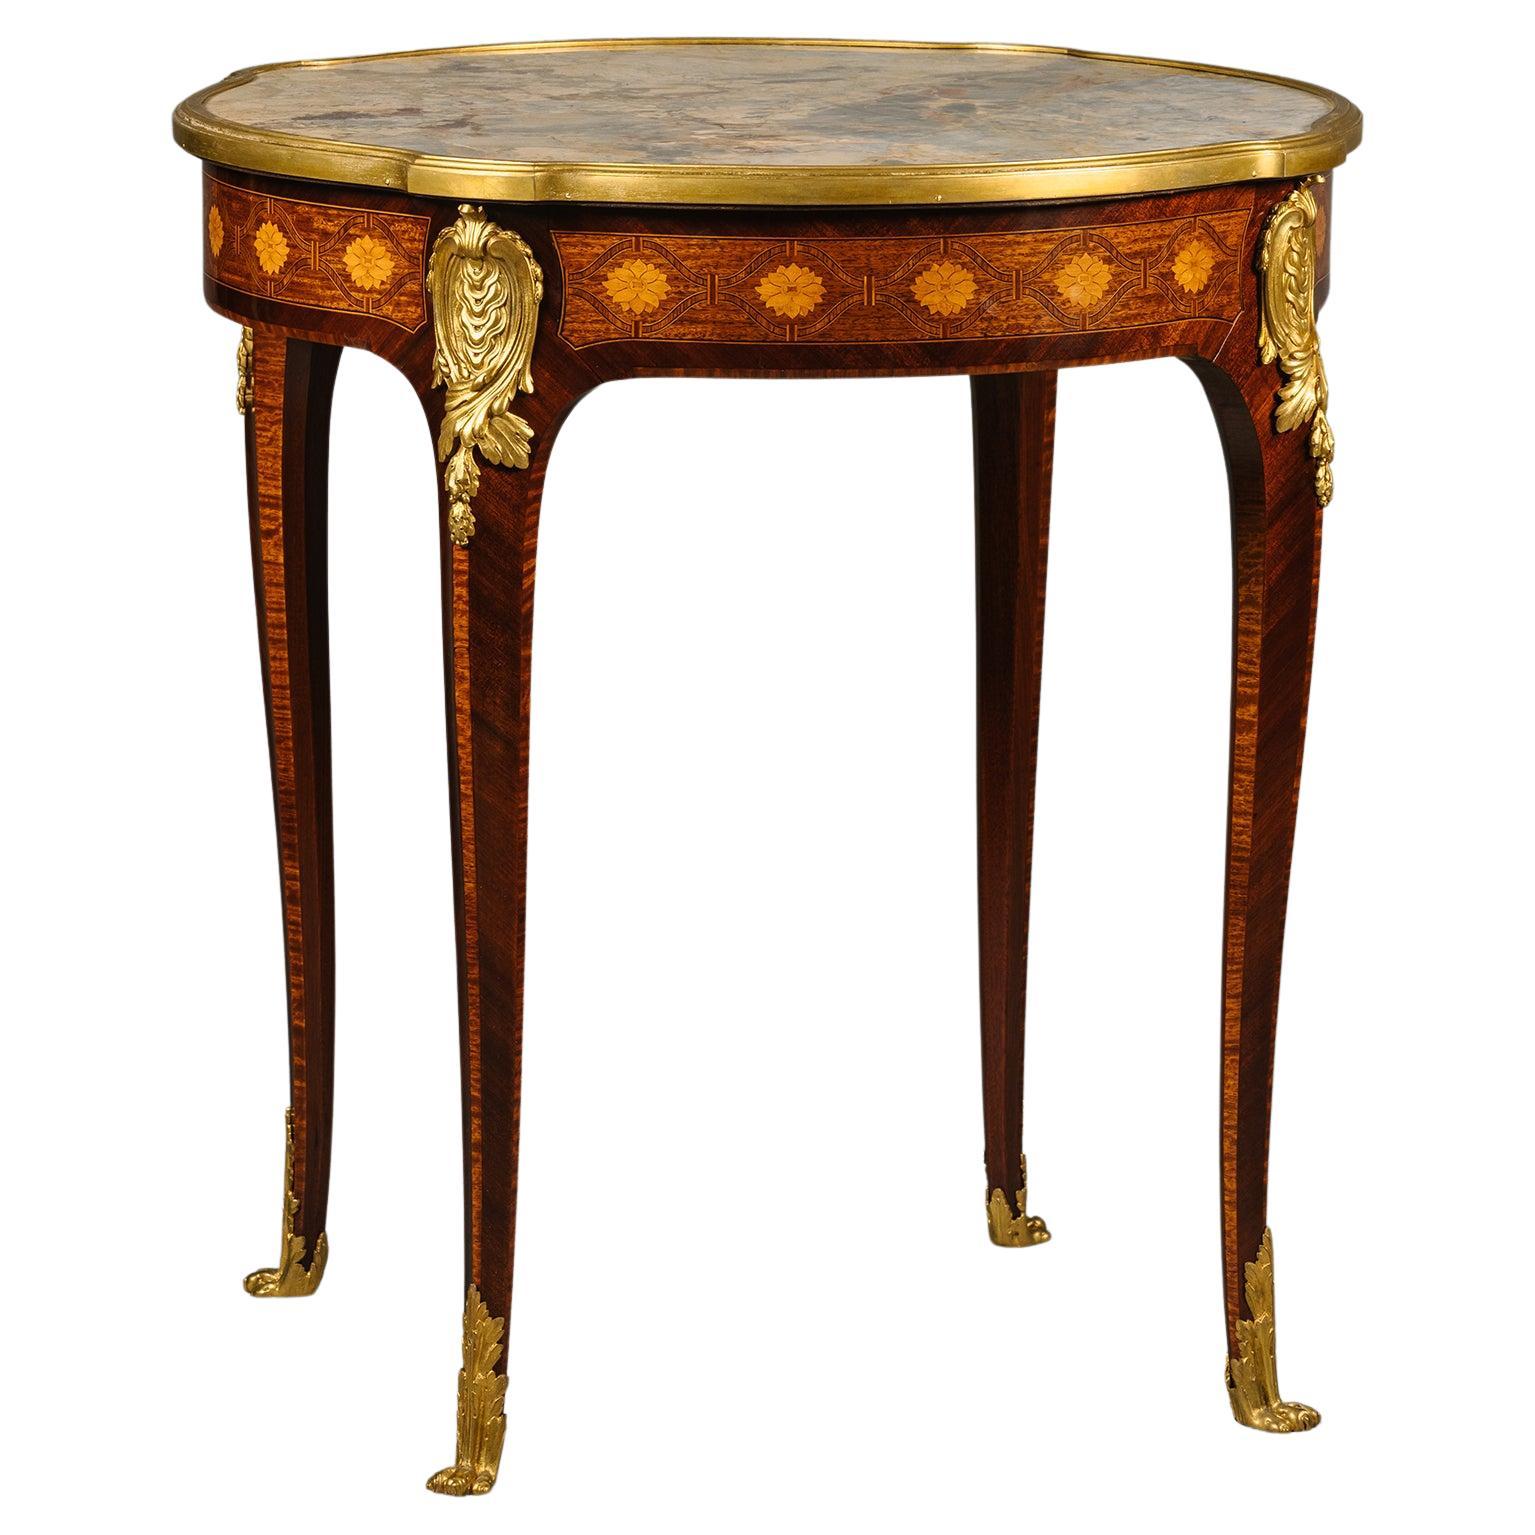  Louis XV Style Parquetry Occasional Table With A Sarrancolin Marble Top